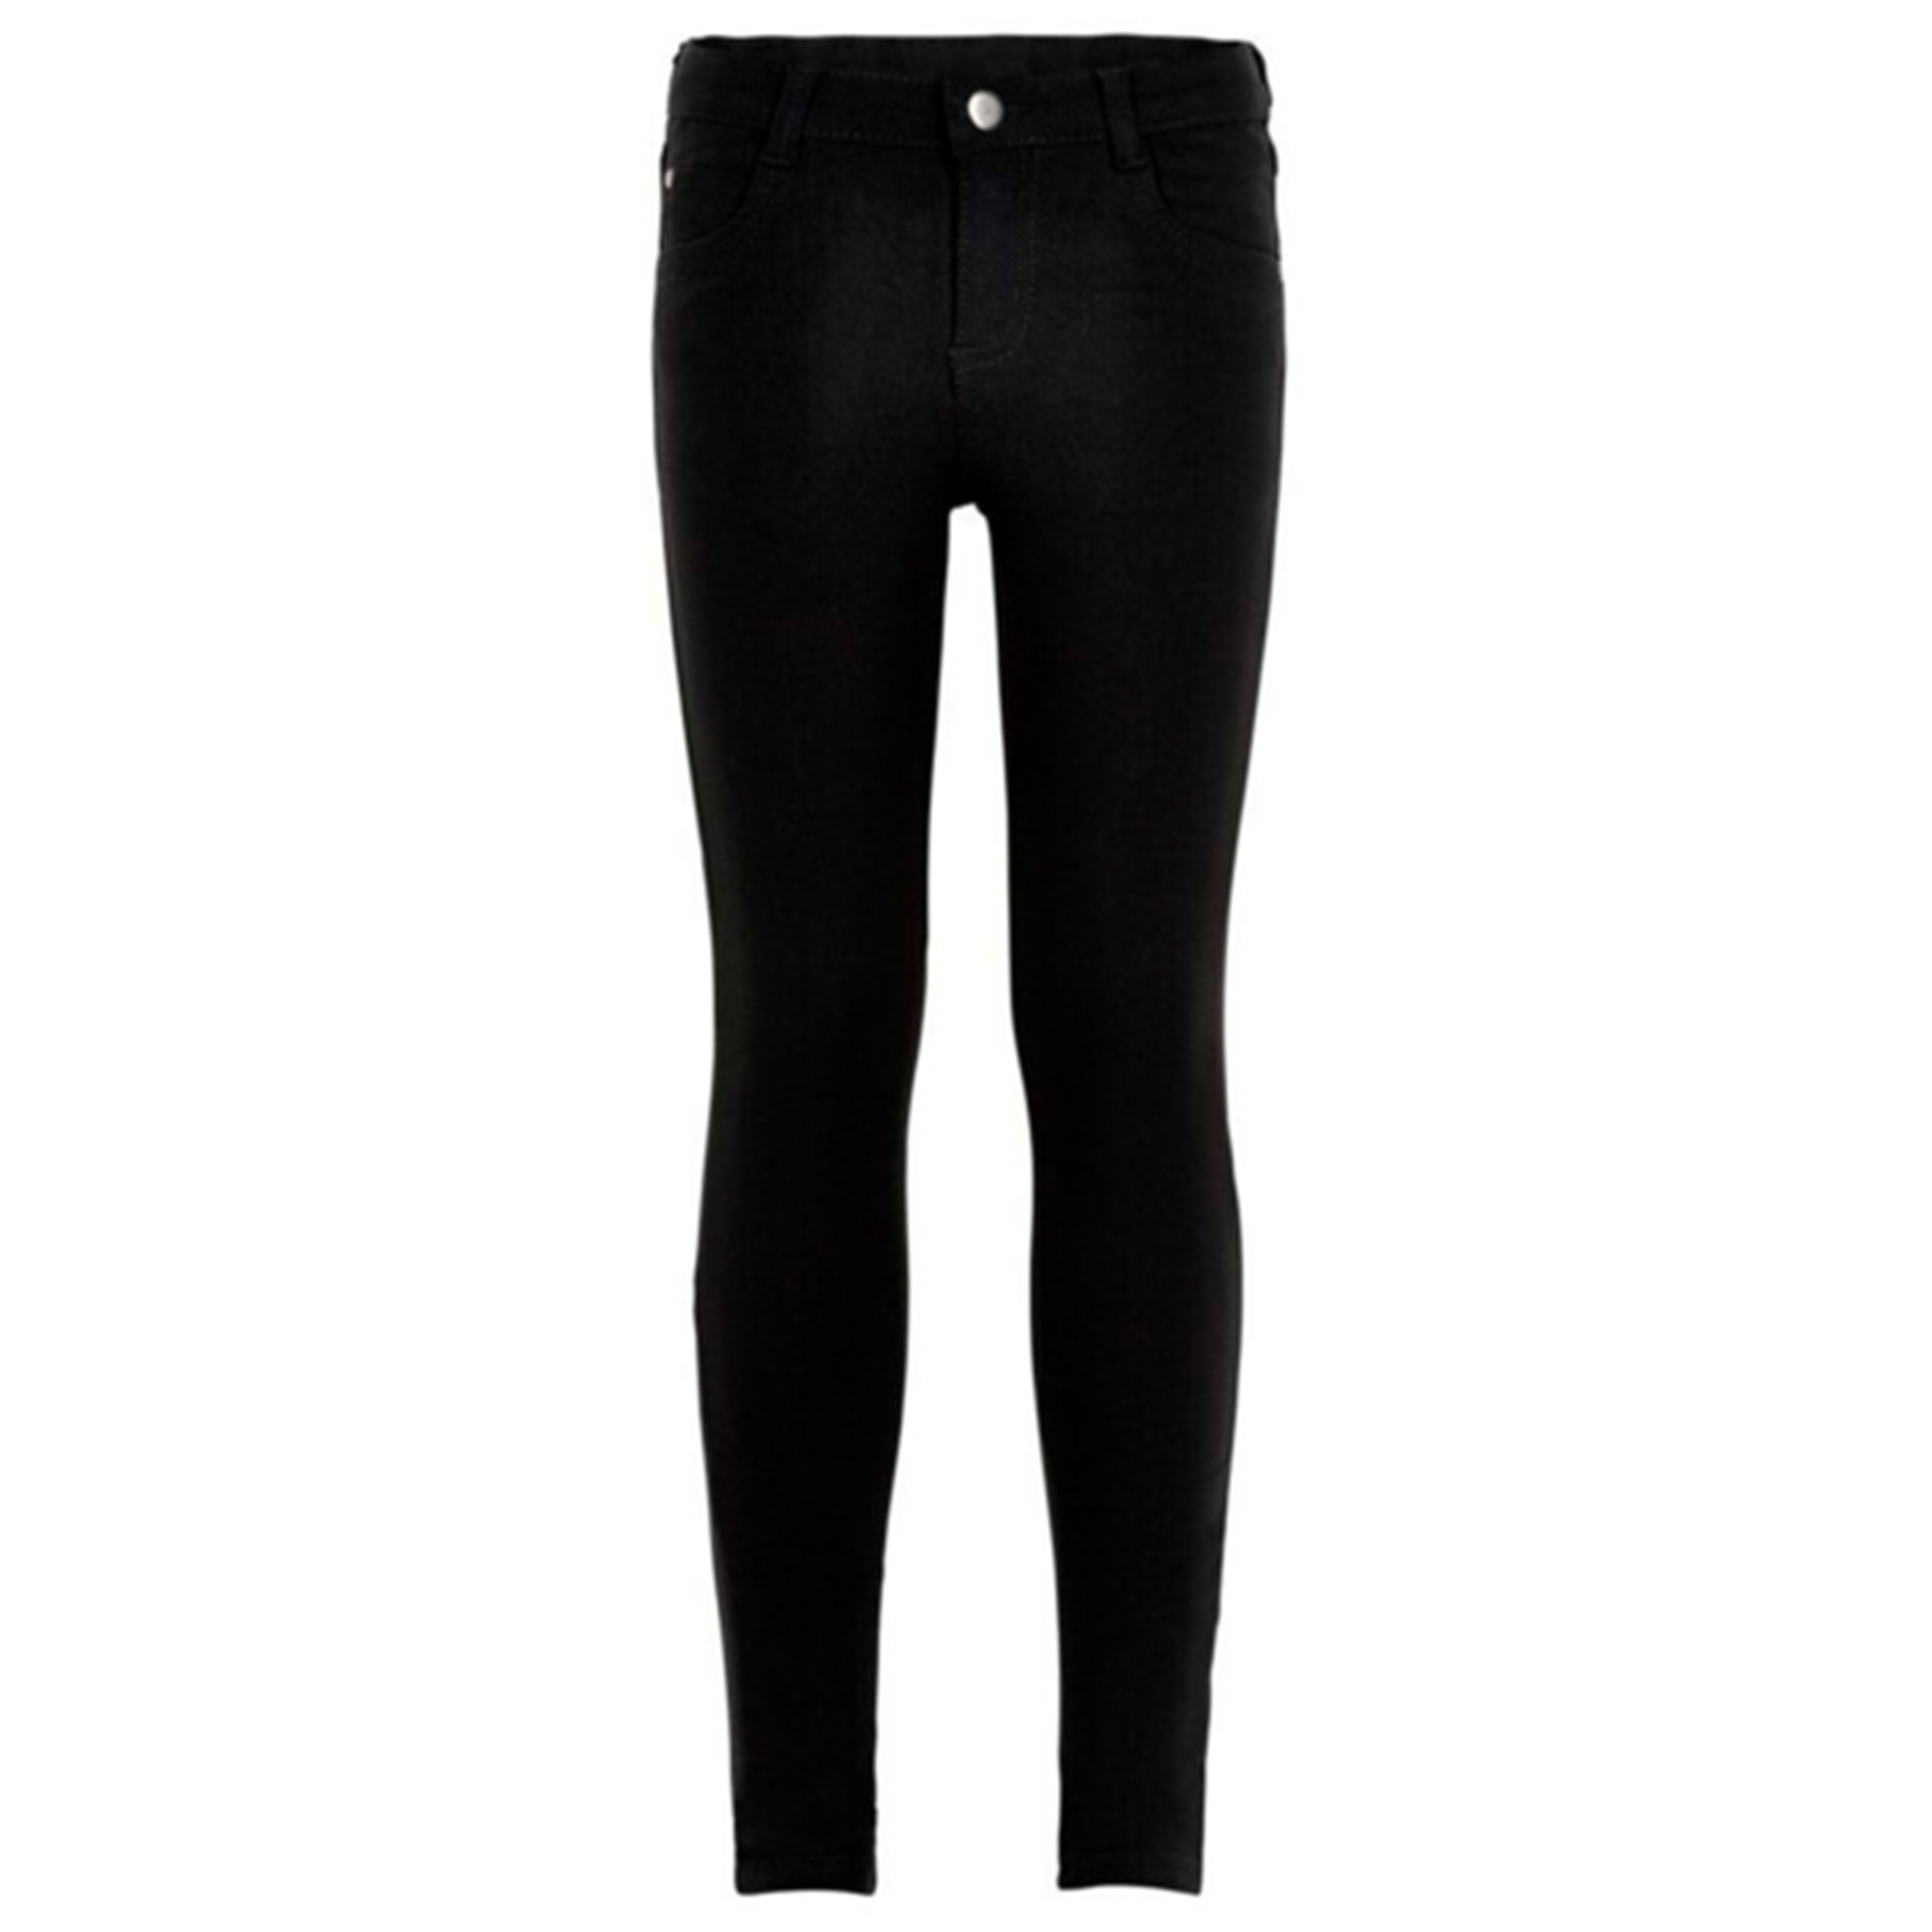 The New Classic Emmie Stretch Pants Black